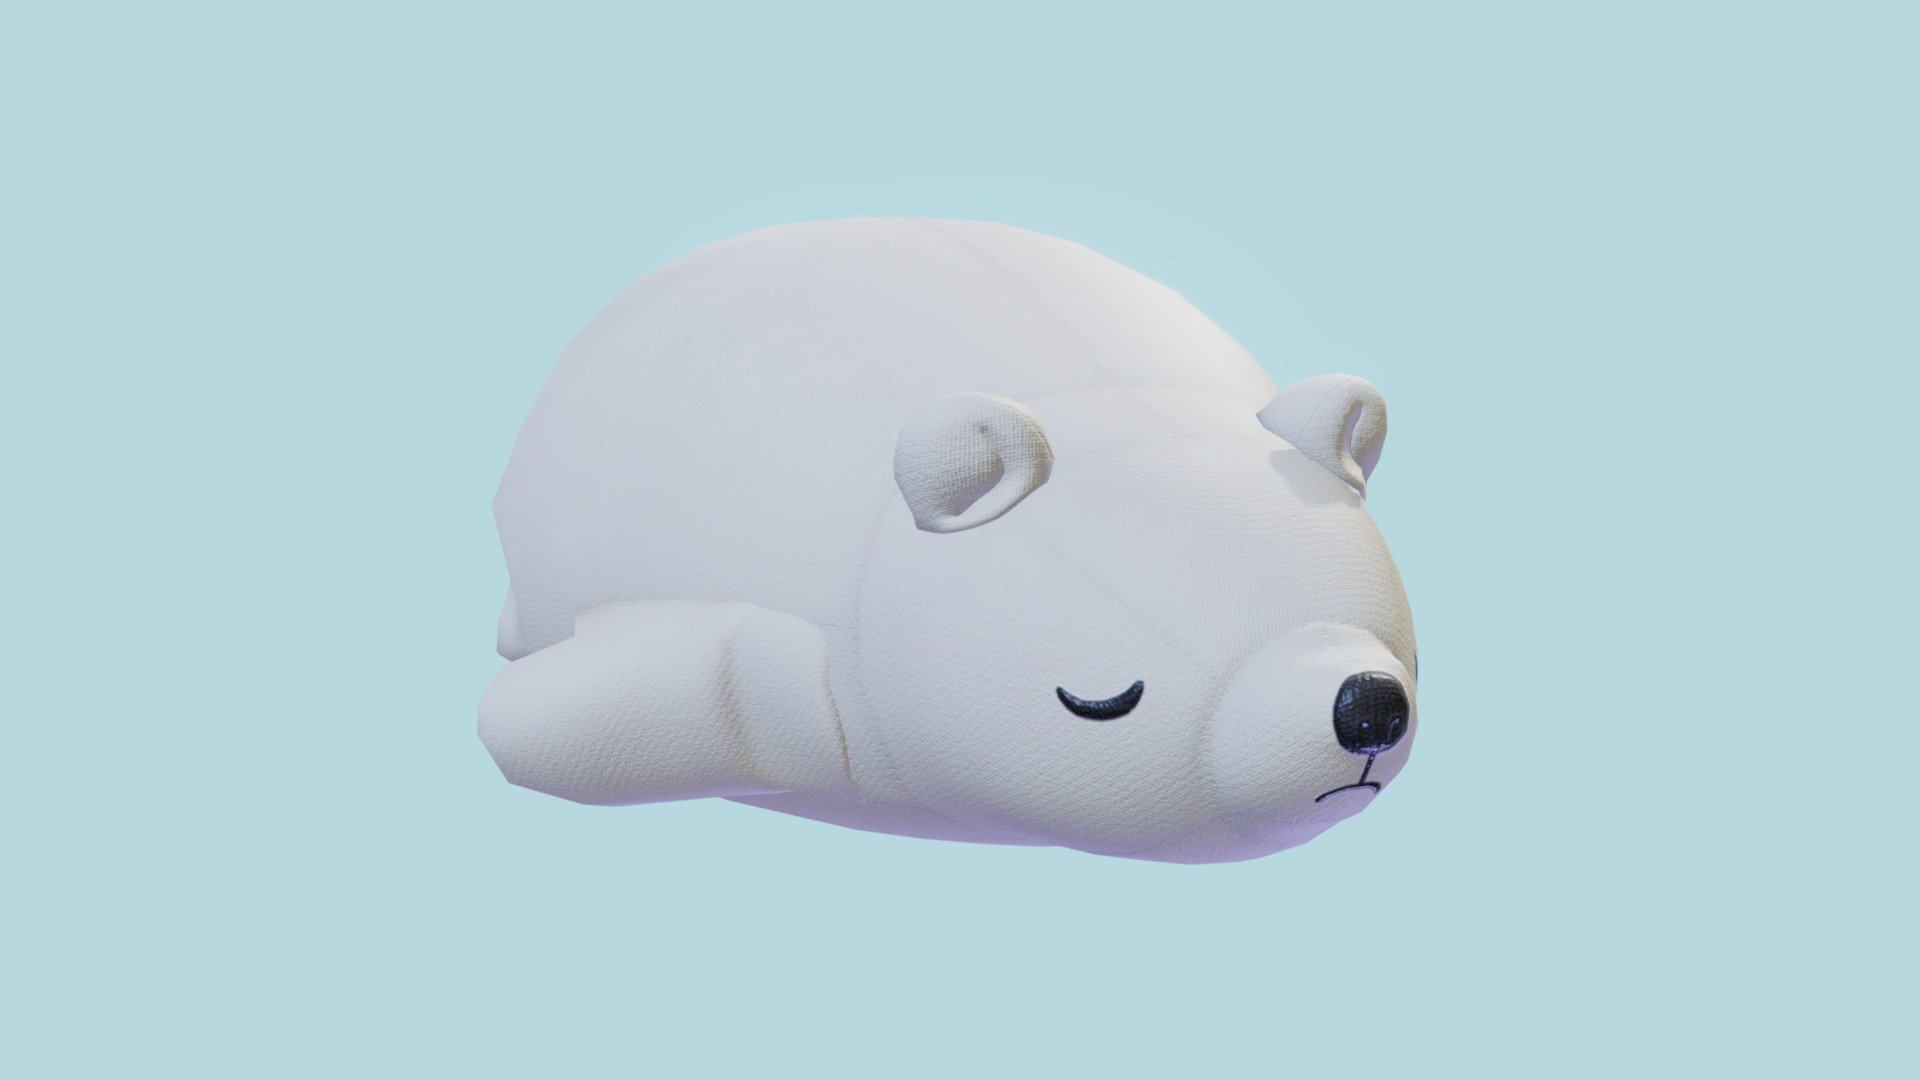 Not just polar bear plushy toy. A little shabby plush toy of polar bear that my sister really likes. He keeps a secret in himself, but I'm not sure yet what that means&hellip;
Polycount: less than 800 quads. 3 PBR JPG 4k texture maps: - Color, Roughness, - Normal; It is SO CUTE! UWU! - White polar bear plushie floof toy - 3D model by rsakelr 3d model